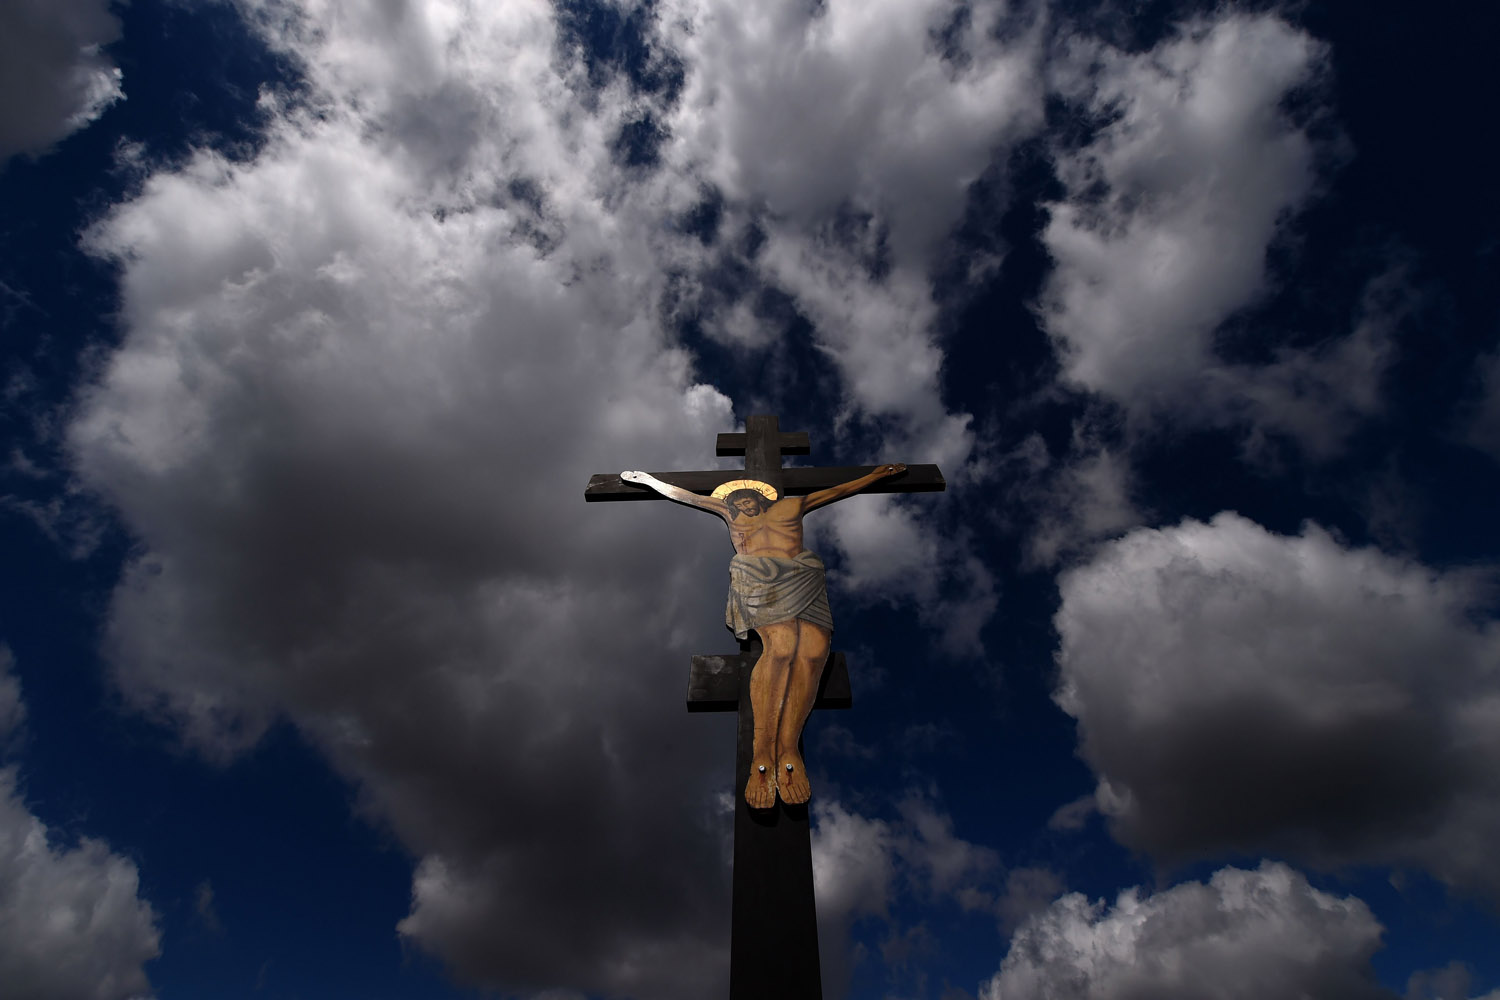 Apr. 18, 2014. An image of Jesus crucified stands at a hill during the ceremony marking the Apokathelosis, the removal of Christ's body from the Cross, which forms a key part of Orthodox Easter, in a ceremony at the Church of the Dormition of the Virgin in Penteli, north of Athens.